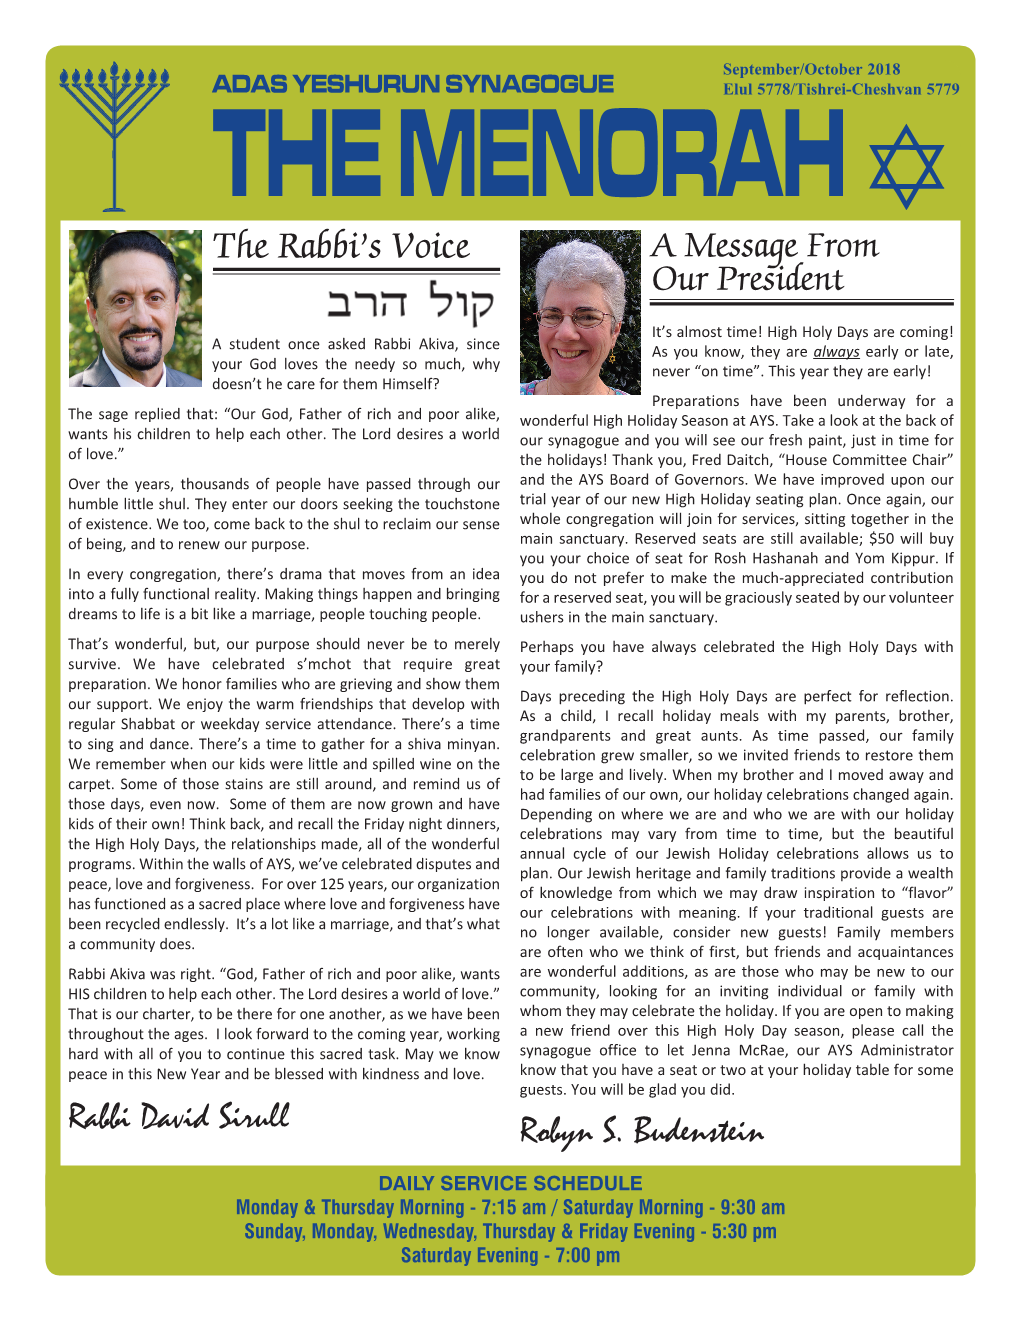 THE MENORAH the Rabbi’S Voice a Message from Our President